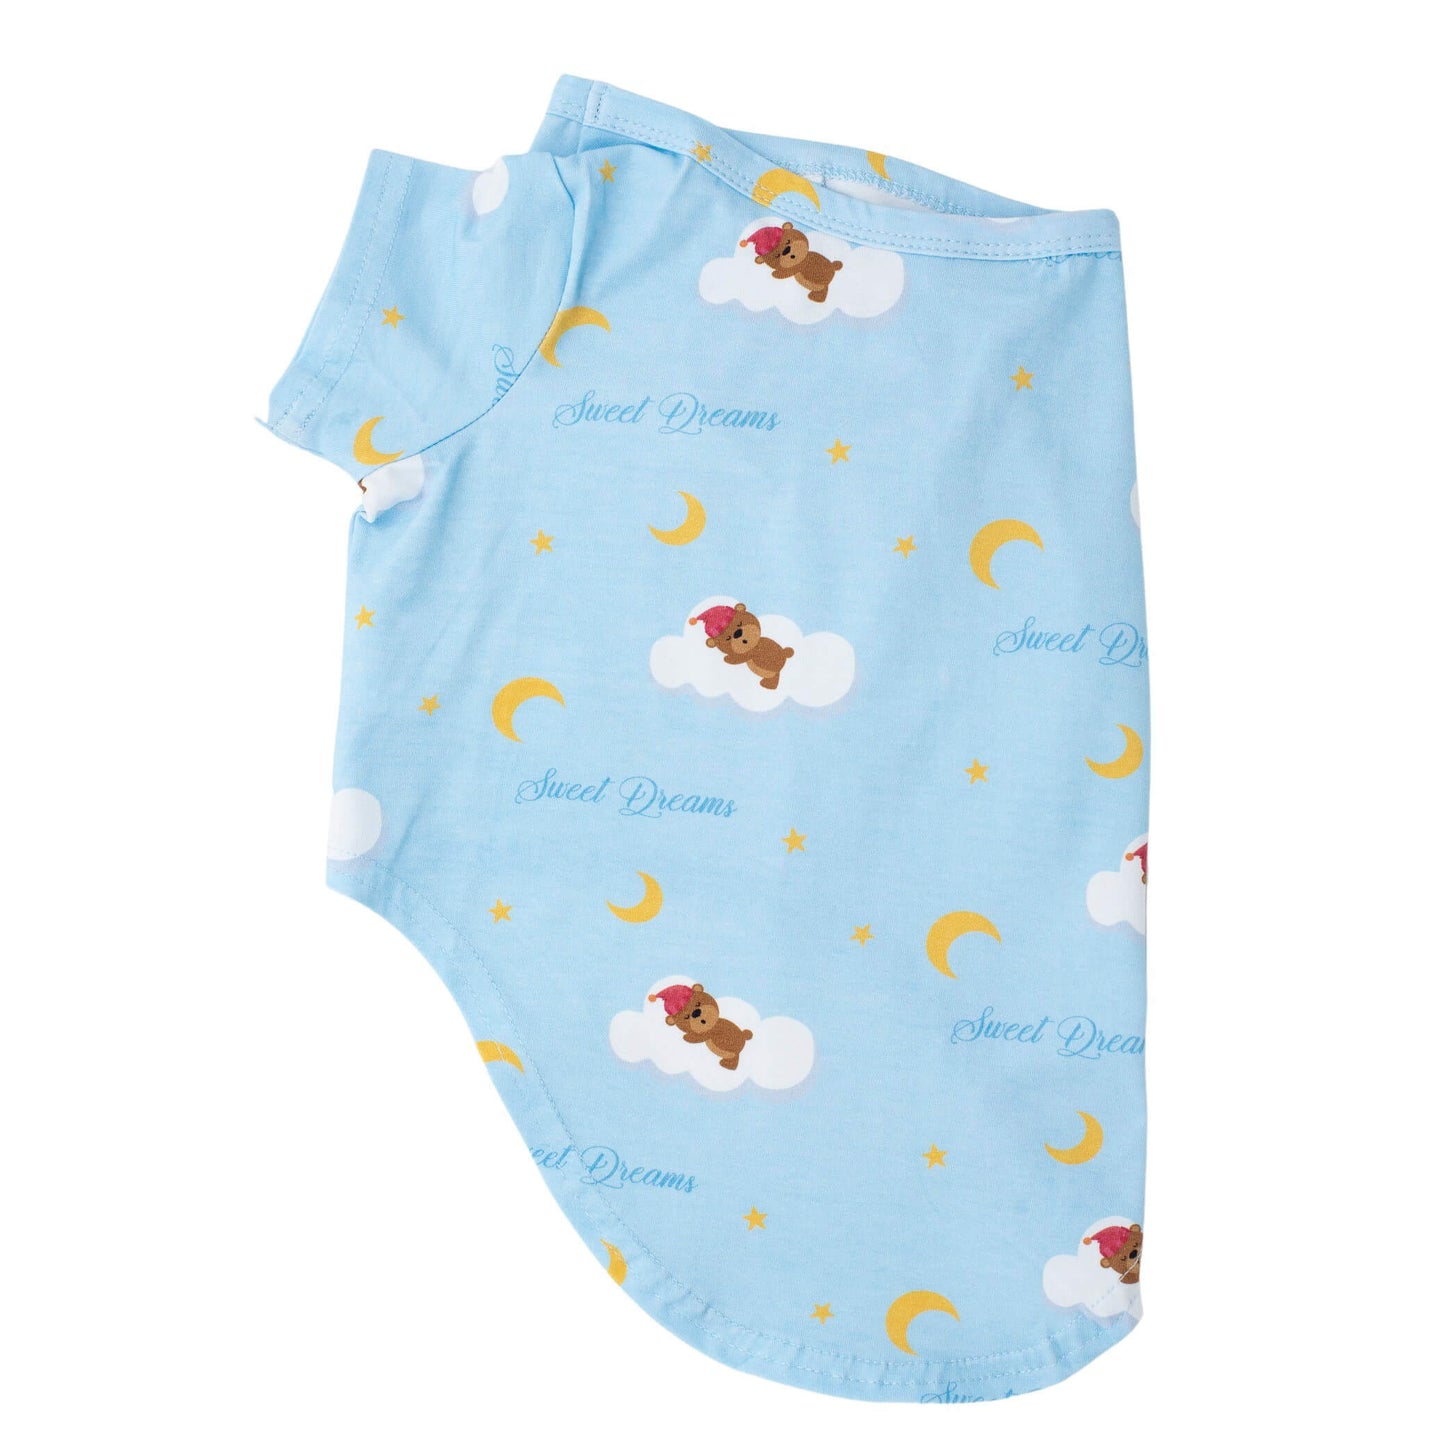  Side flay lay of Vibrant Hounds Lil Dreamer blue pyjamas for dogs. The dog pyjamas are sky blue with teddy bears asleep and floating on clouds printed on it.